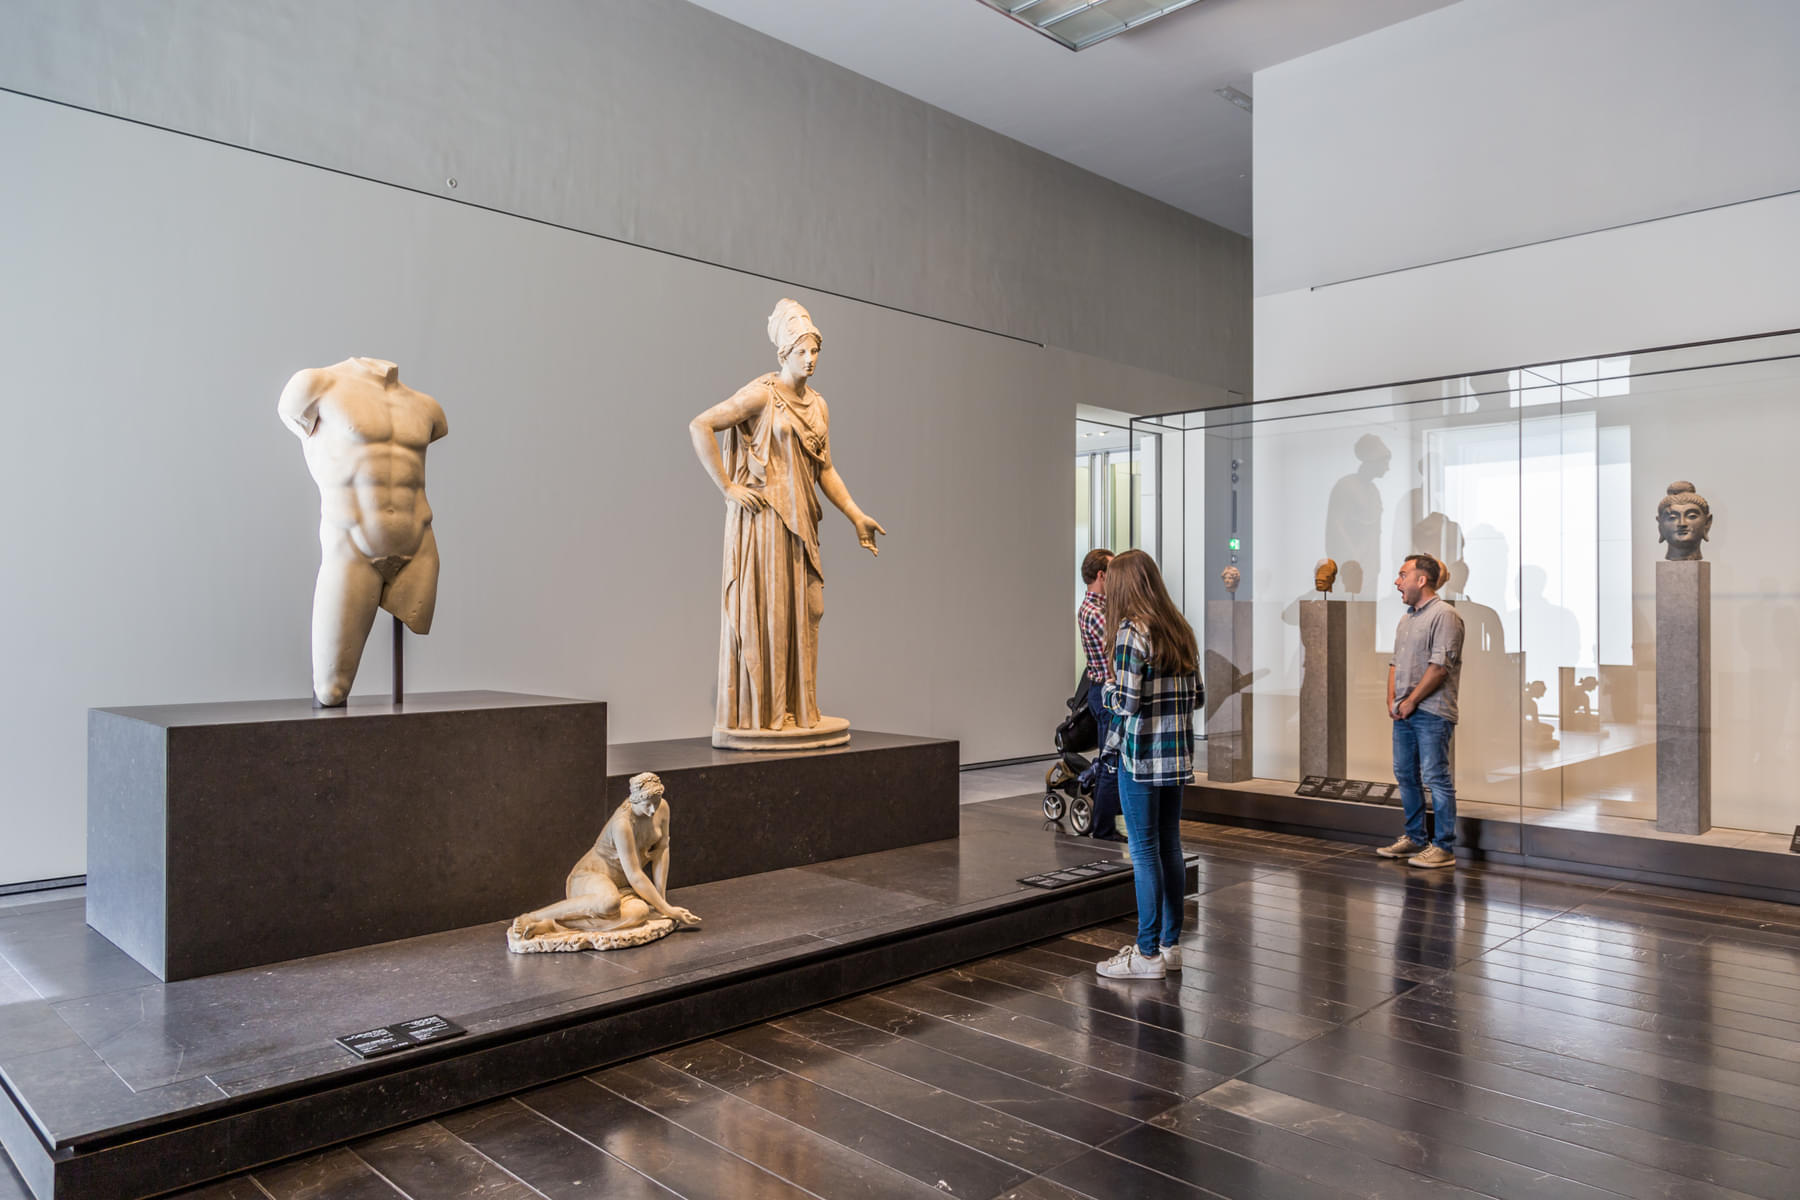 Admire the stunning sculptures at the museum